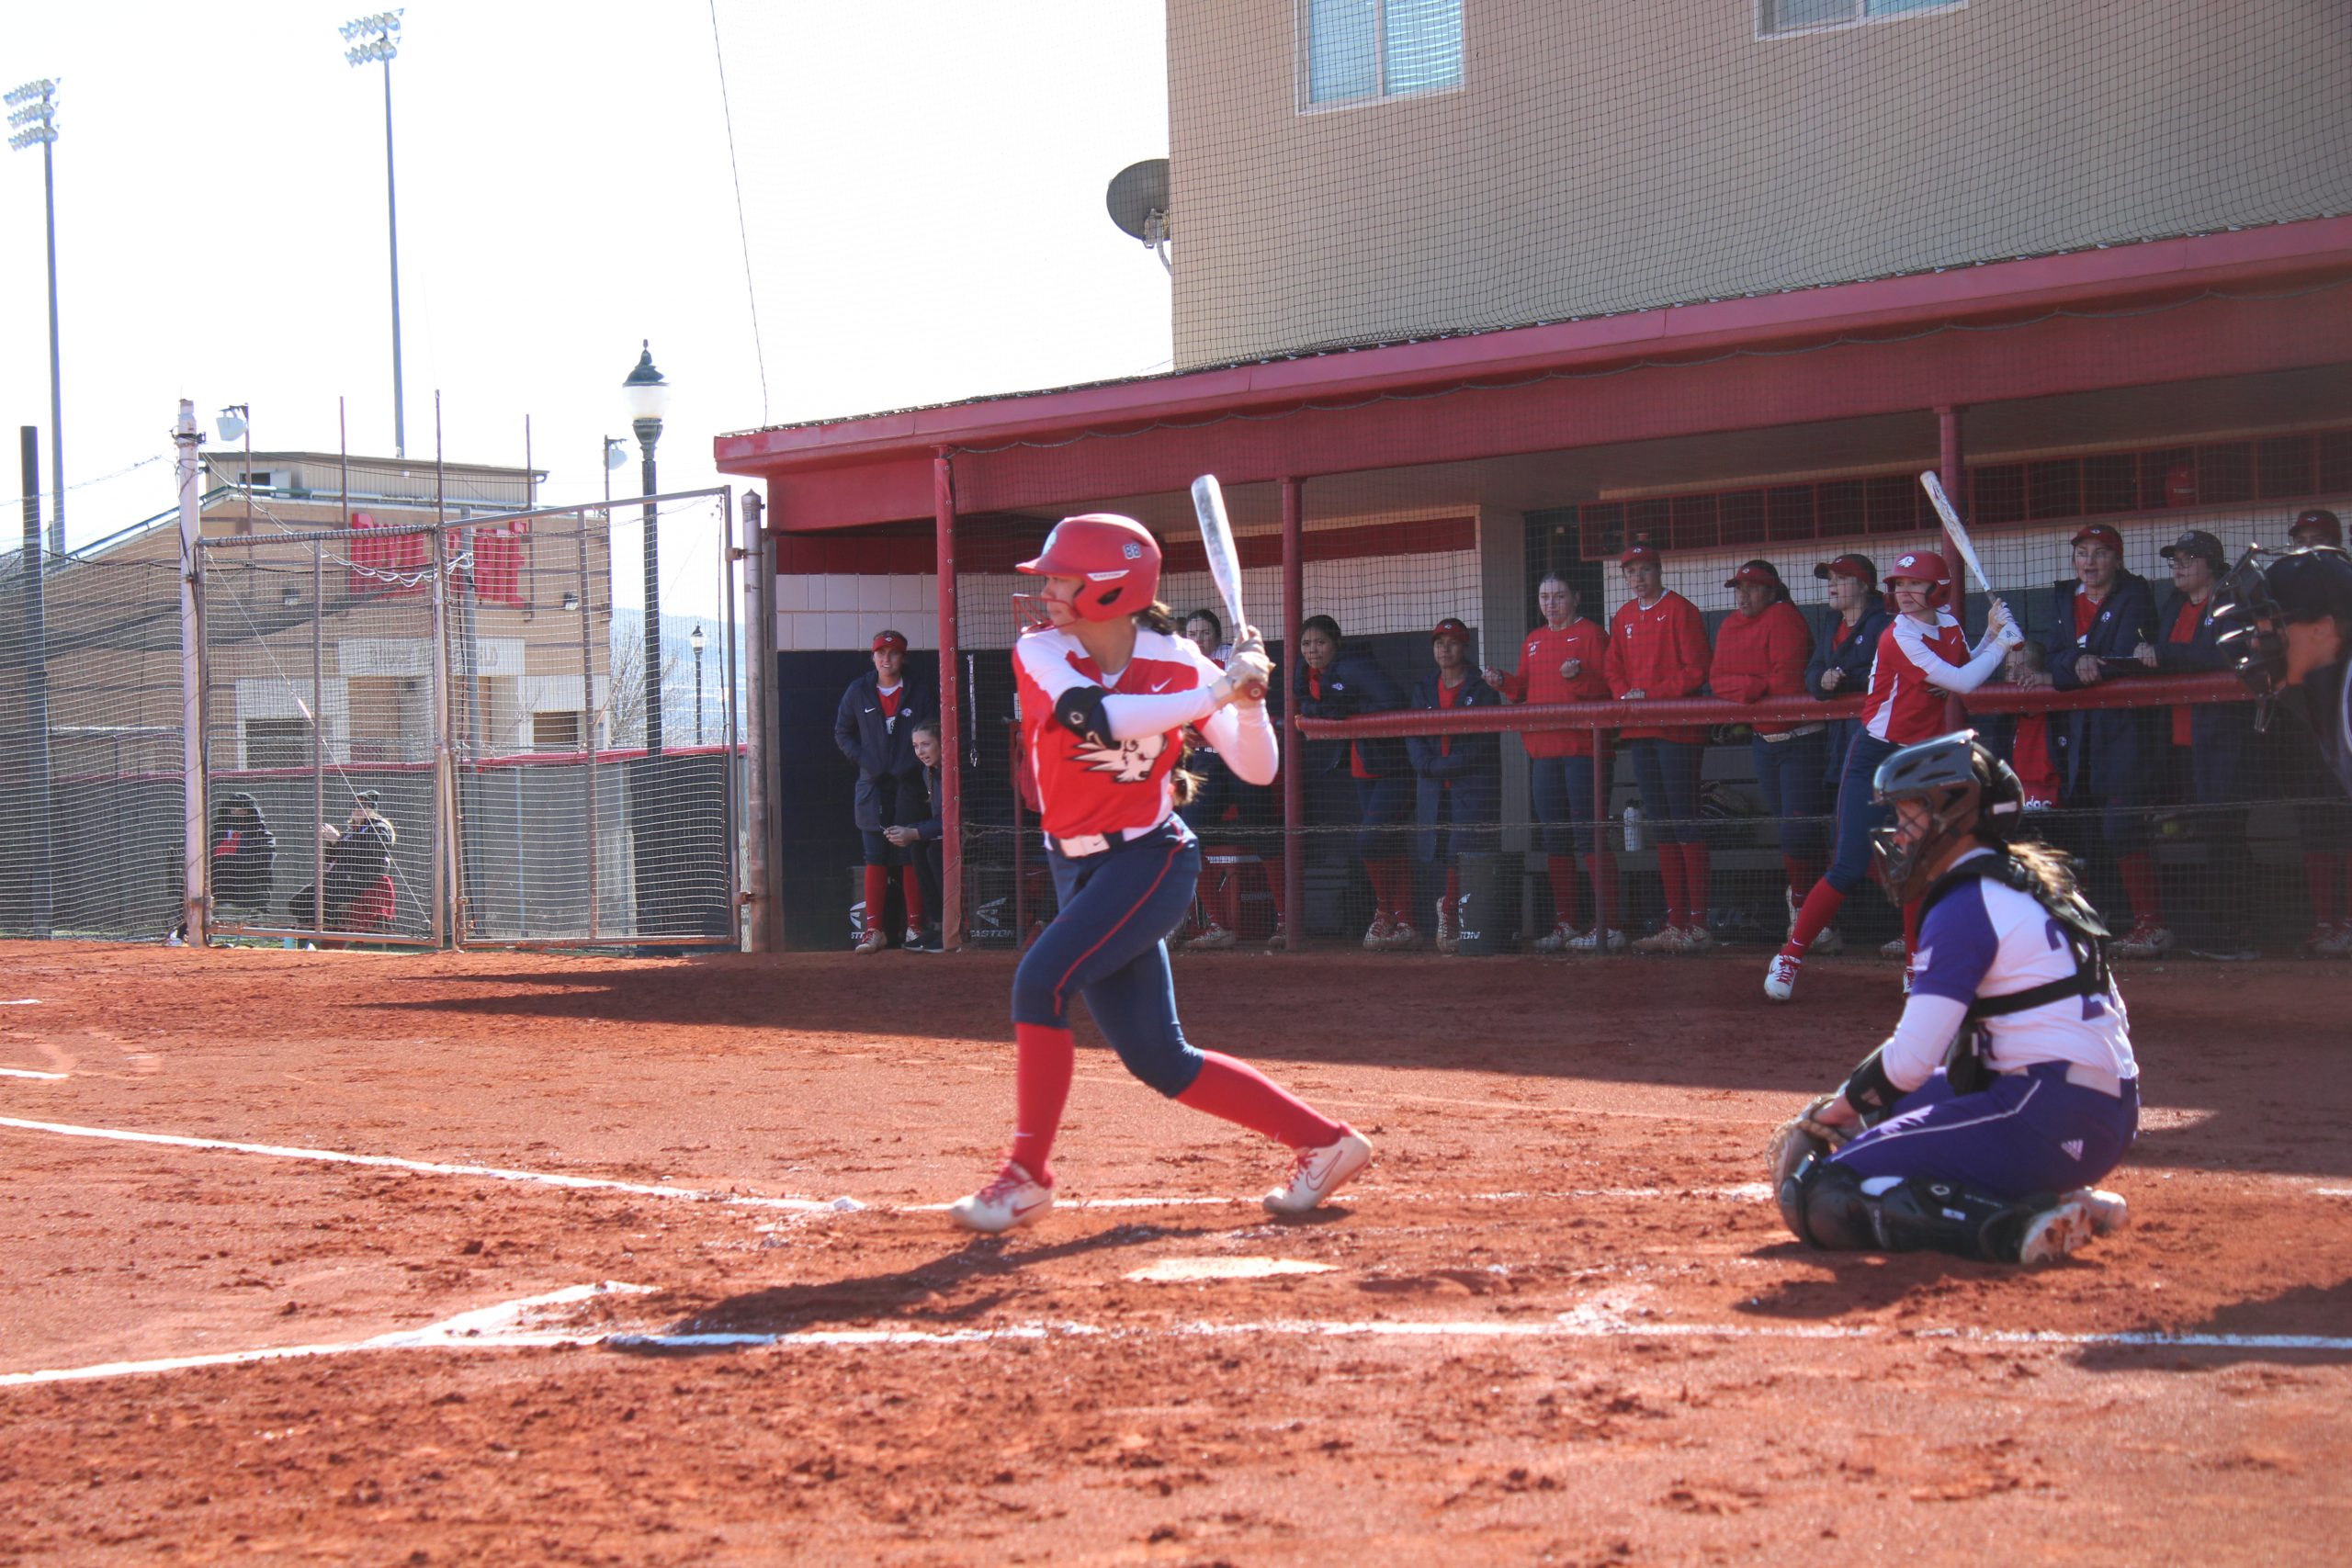 DSU softball team energy continues the fight and defeats 3 teams